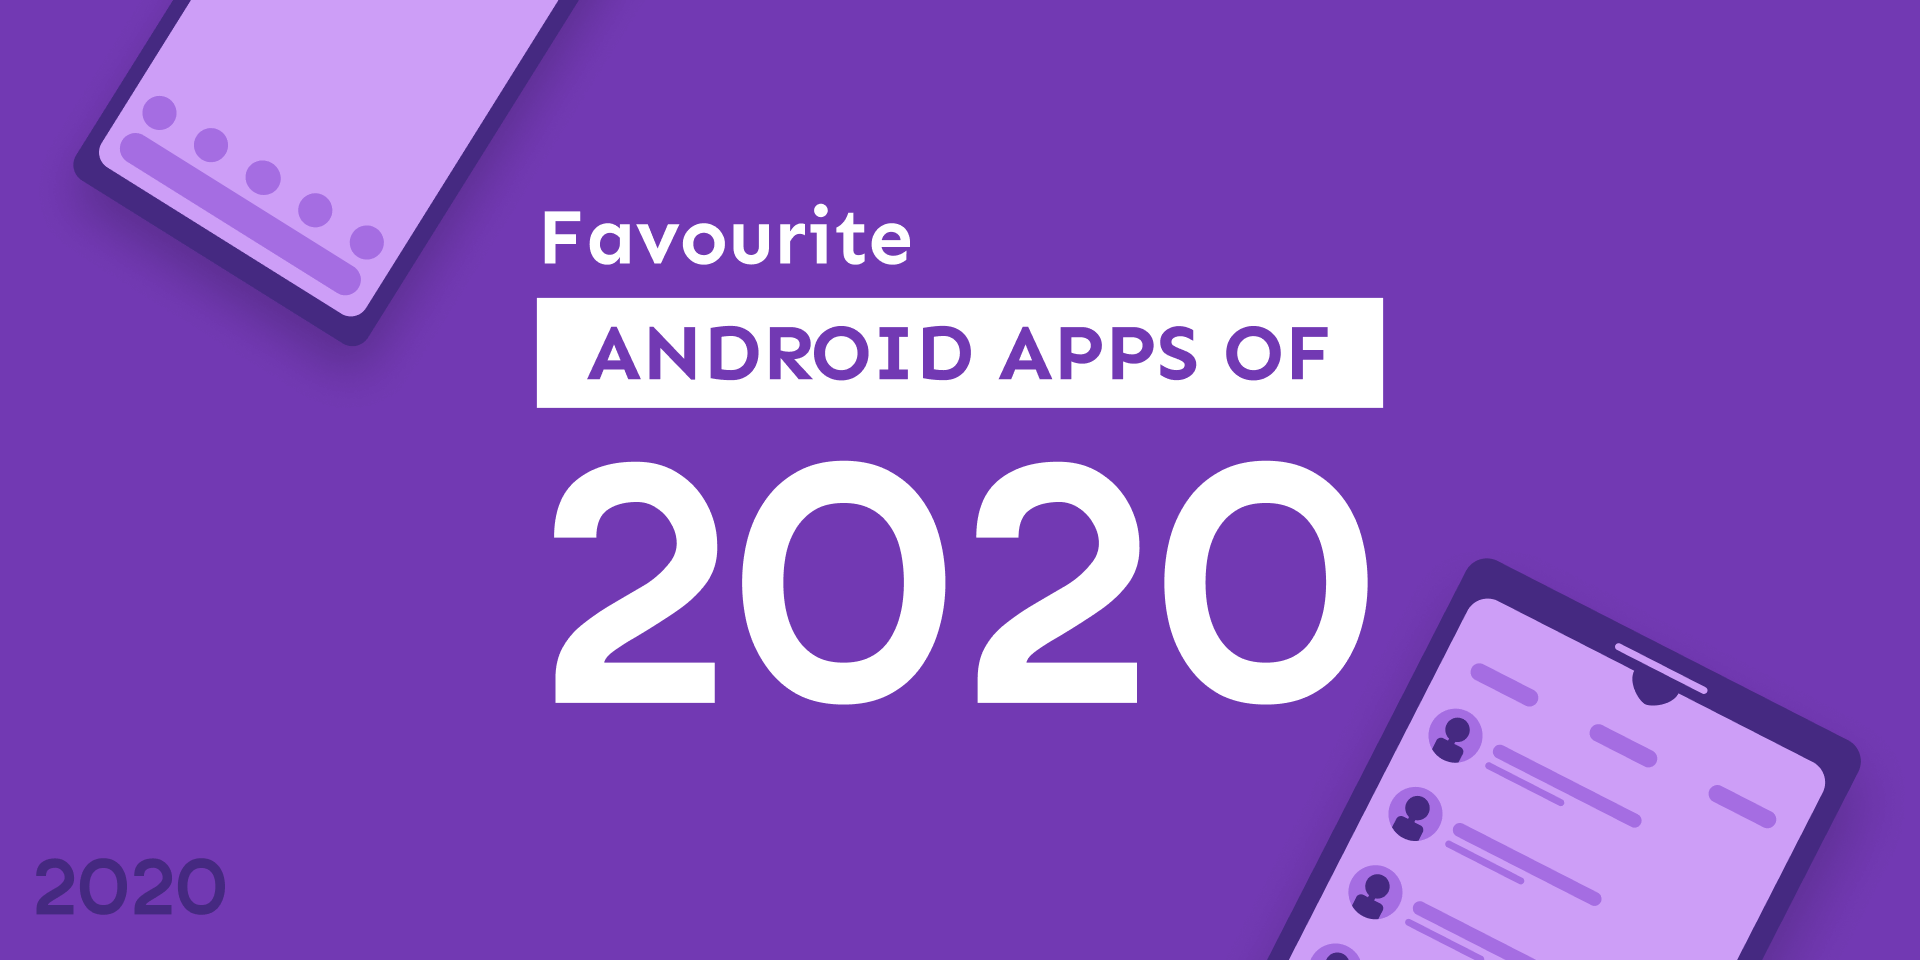 Favourite Android Apps of 2020